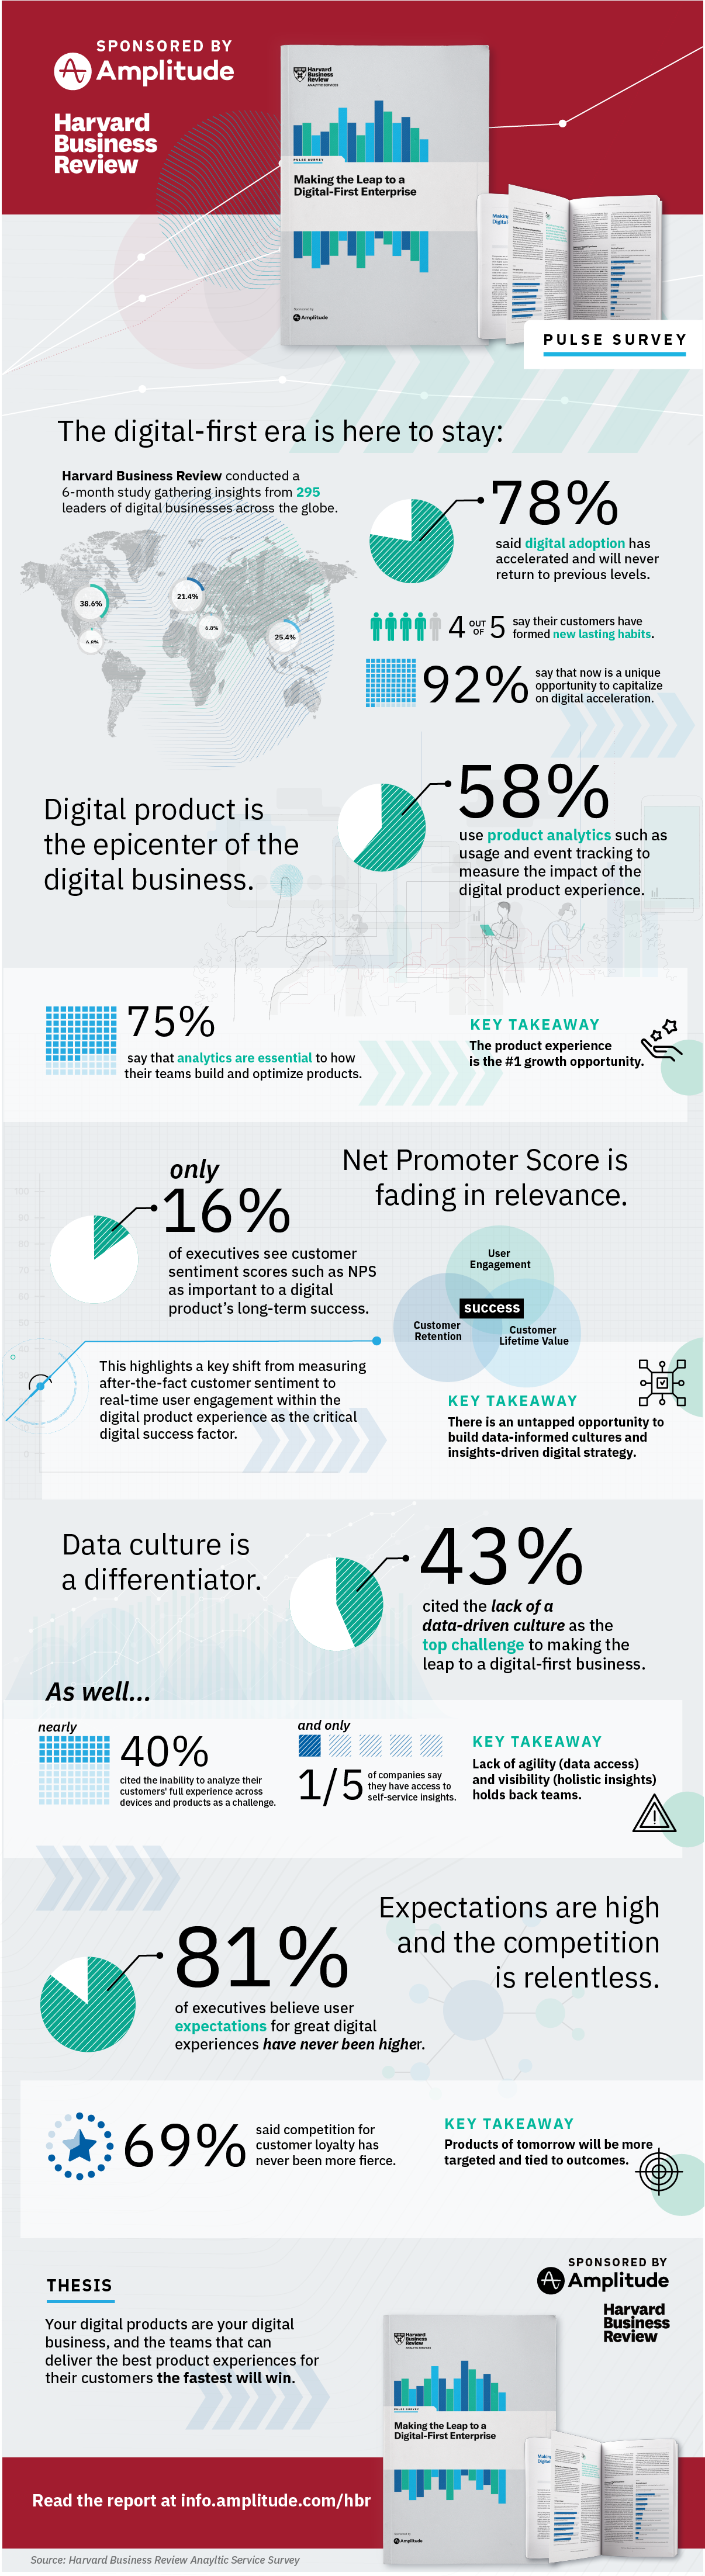 Infographic: What 295 executives say about the shift to digital-first, according to a Harvard Business Review Analytics Services report sponsored by Amplitude